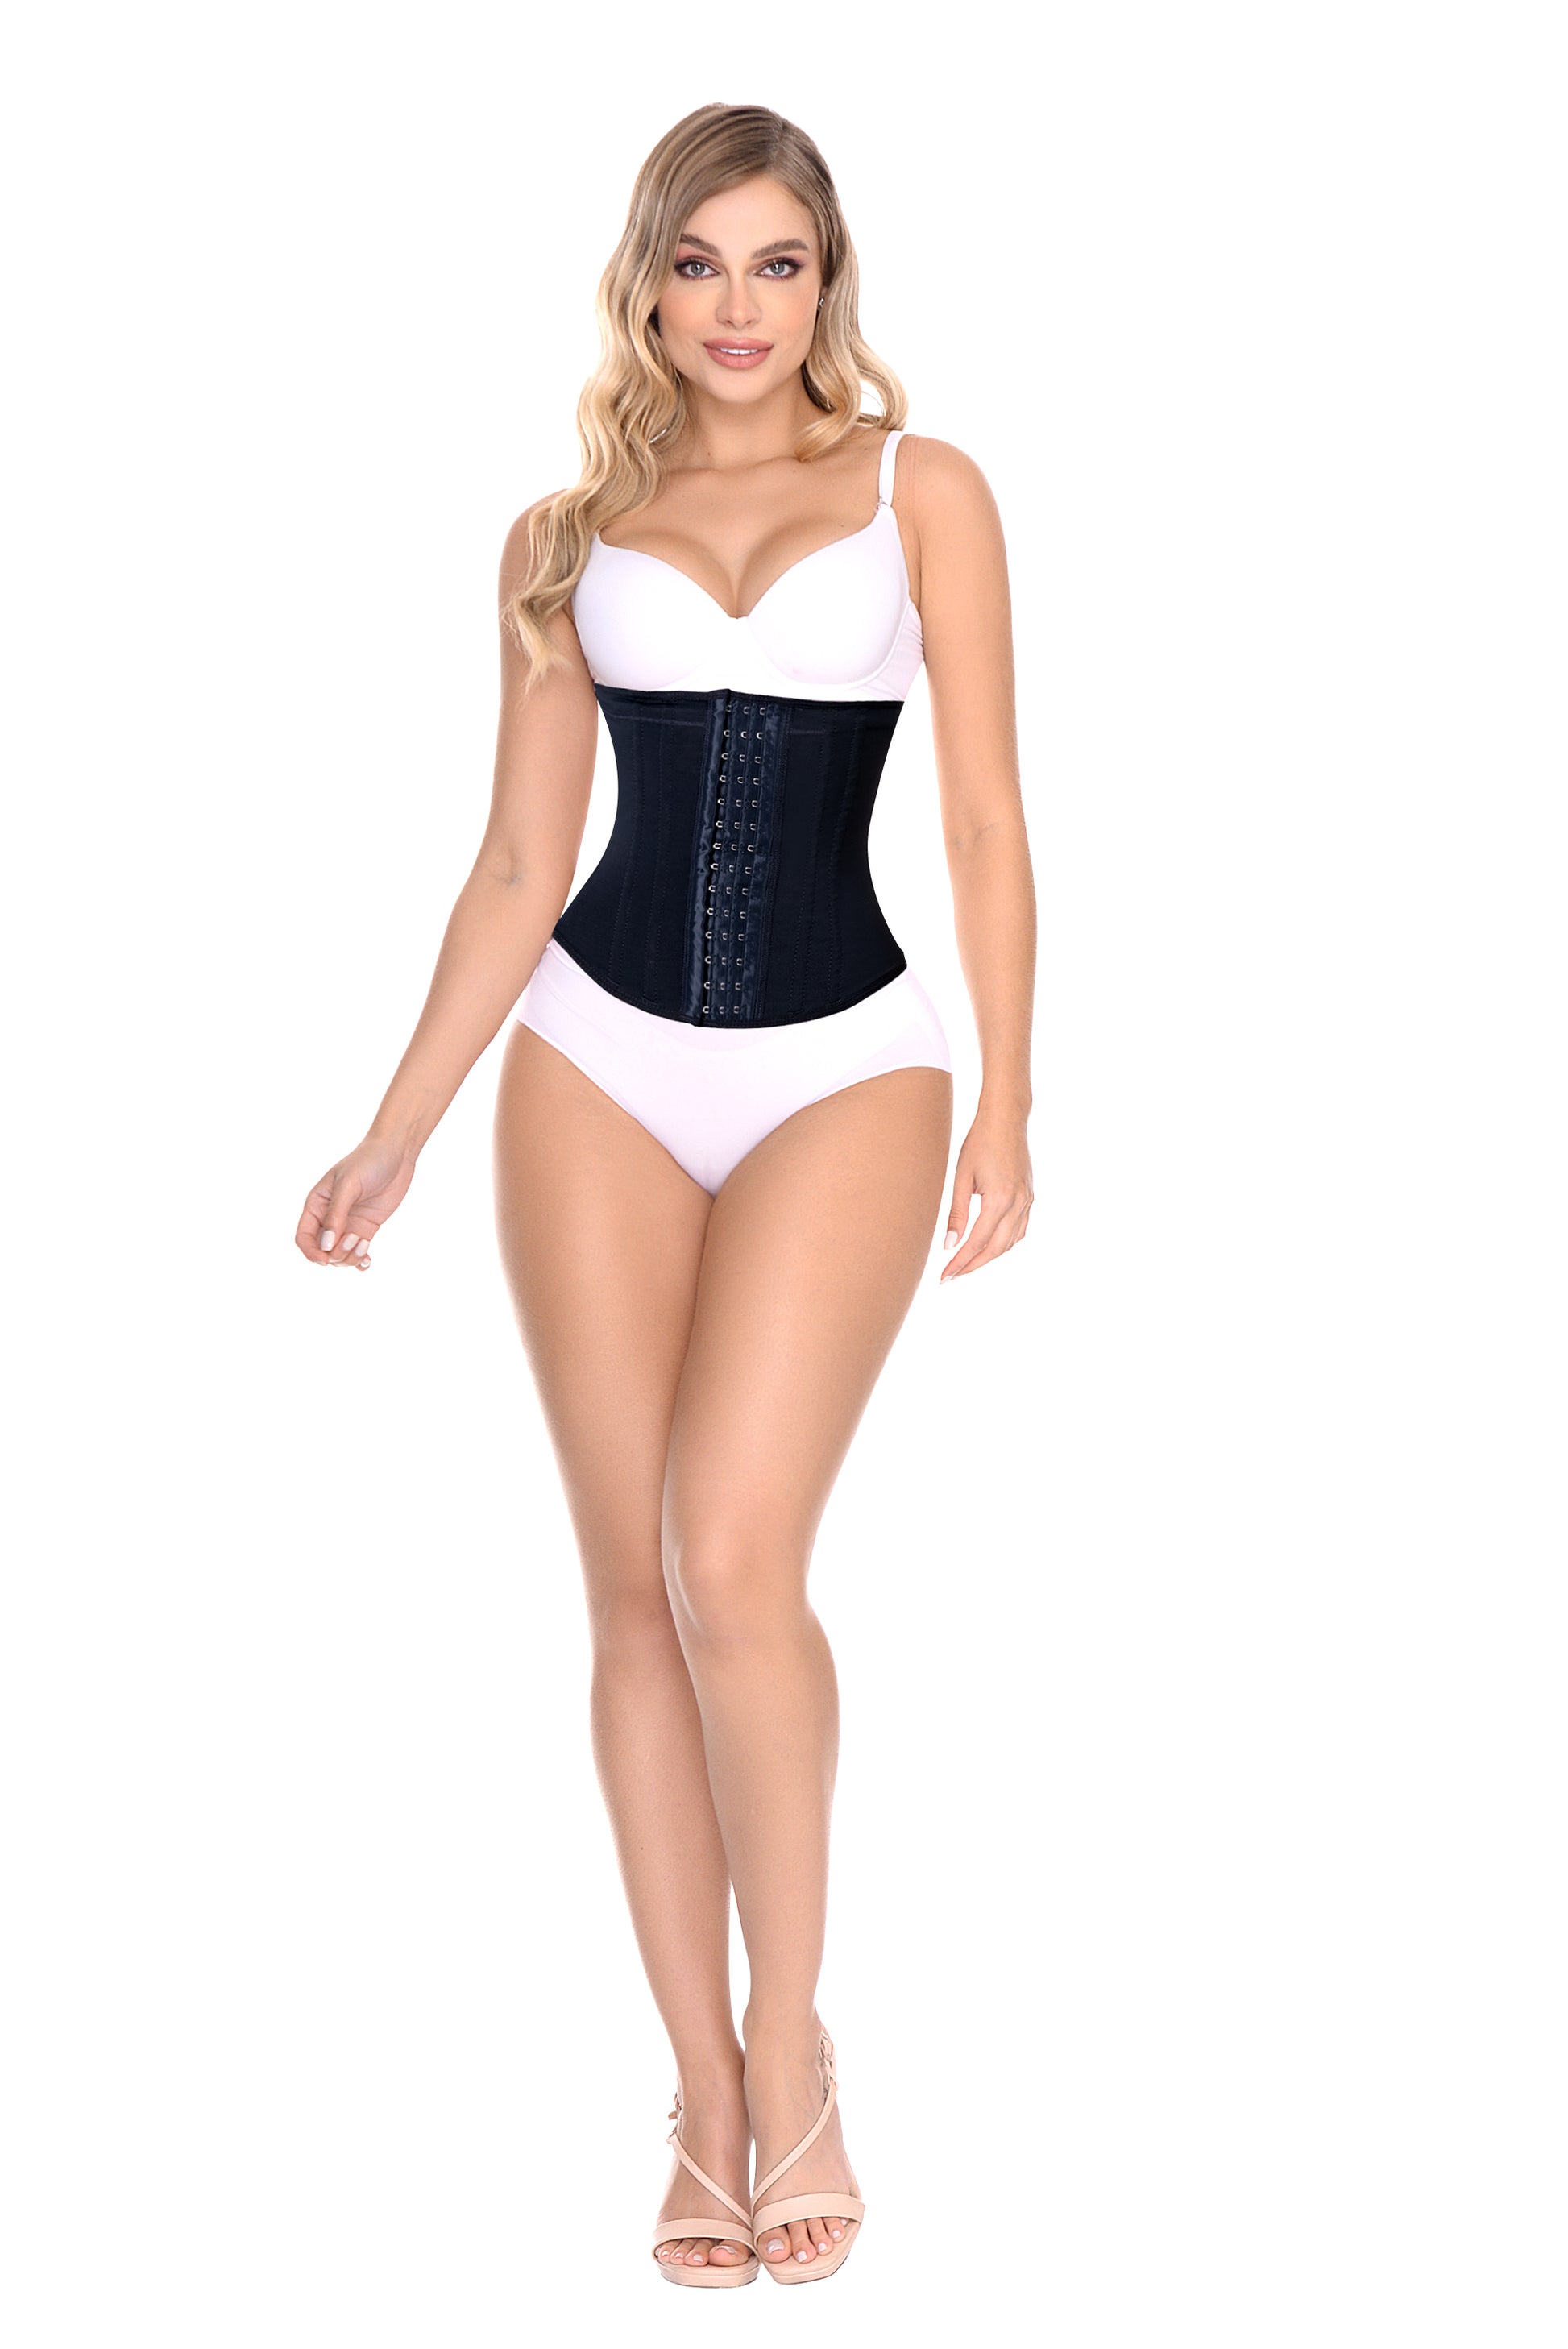 Ann Michell Corset Long Torso Excelencia 3 hooks and Eyes Closure 1024A - BCURVED